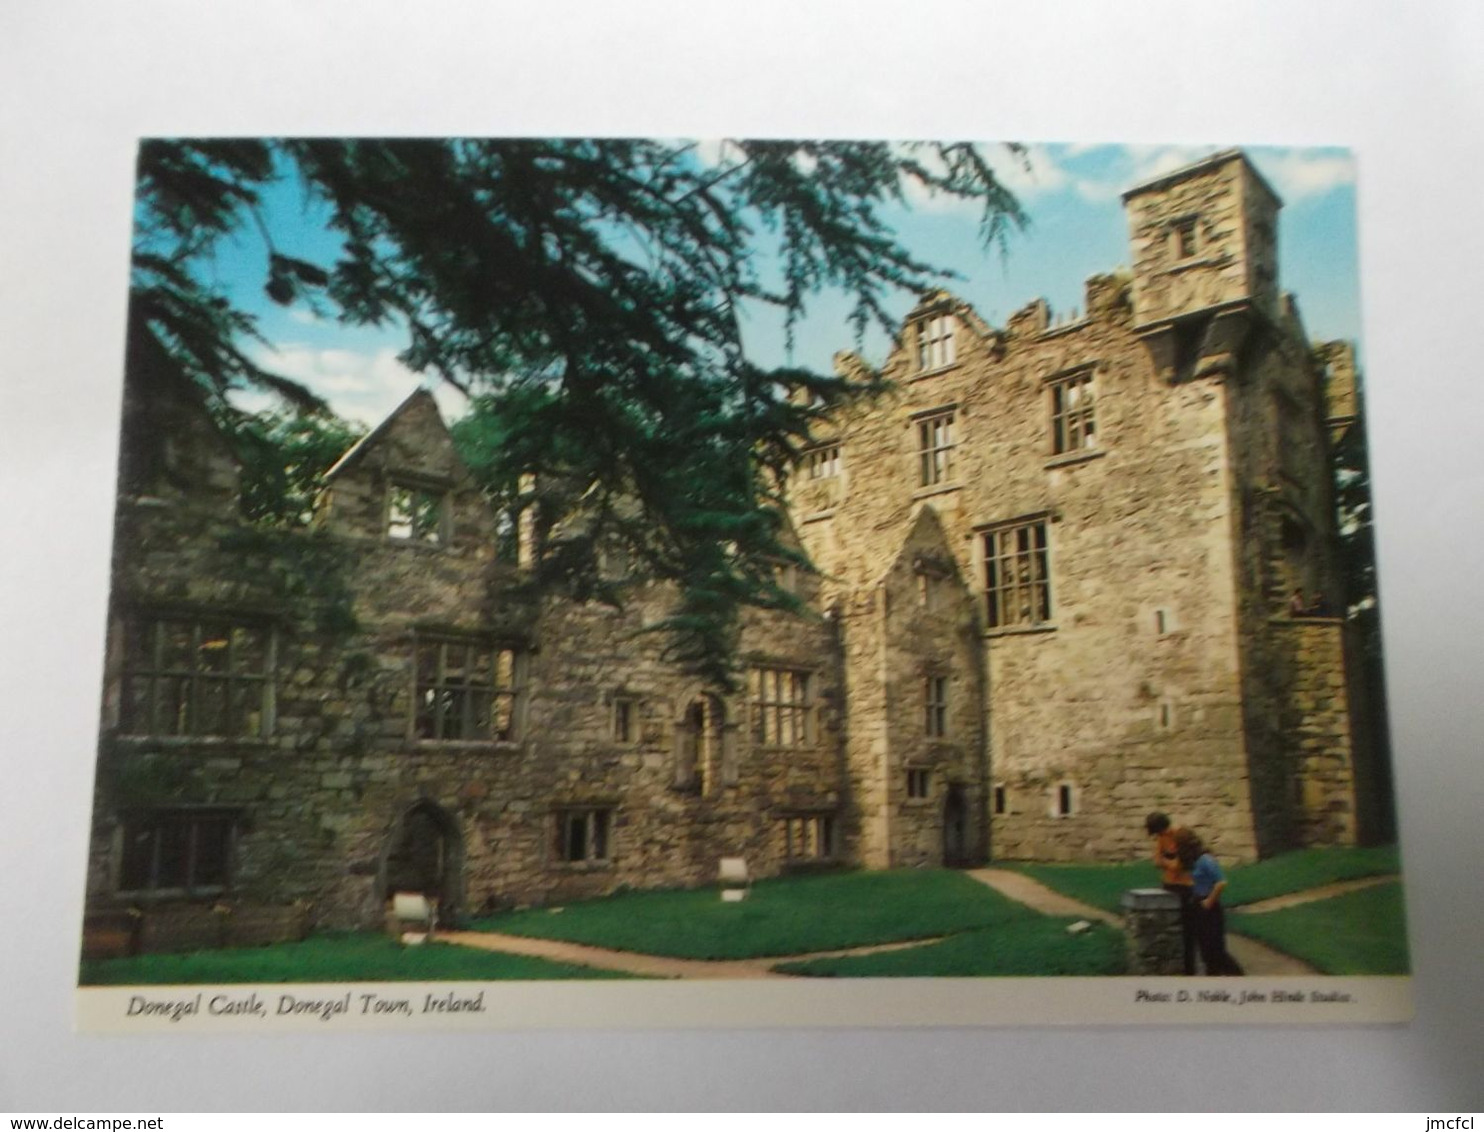 DONEGAL CASTLE - Donegal